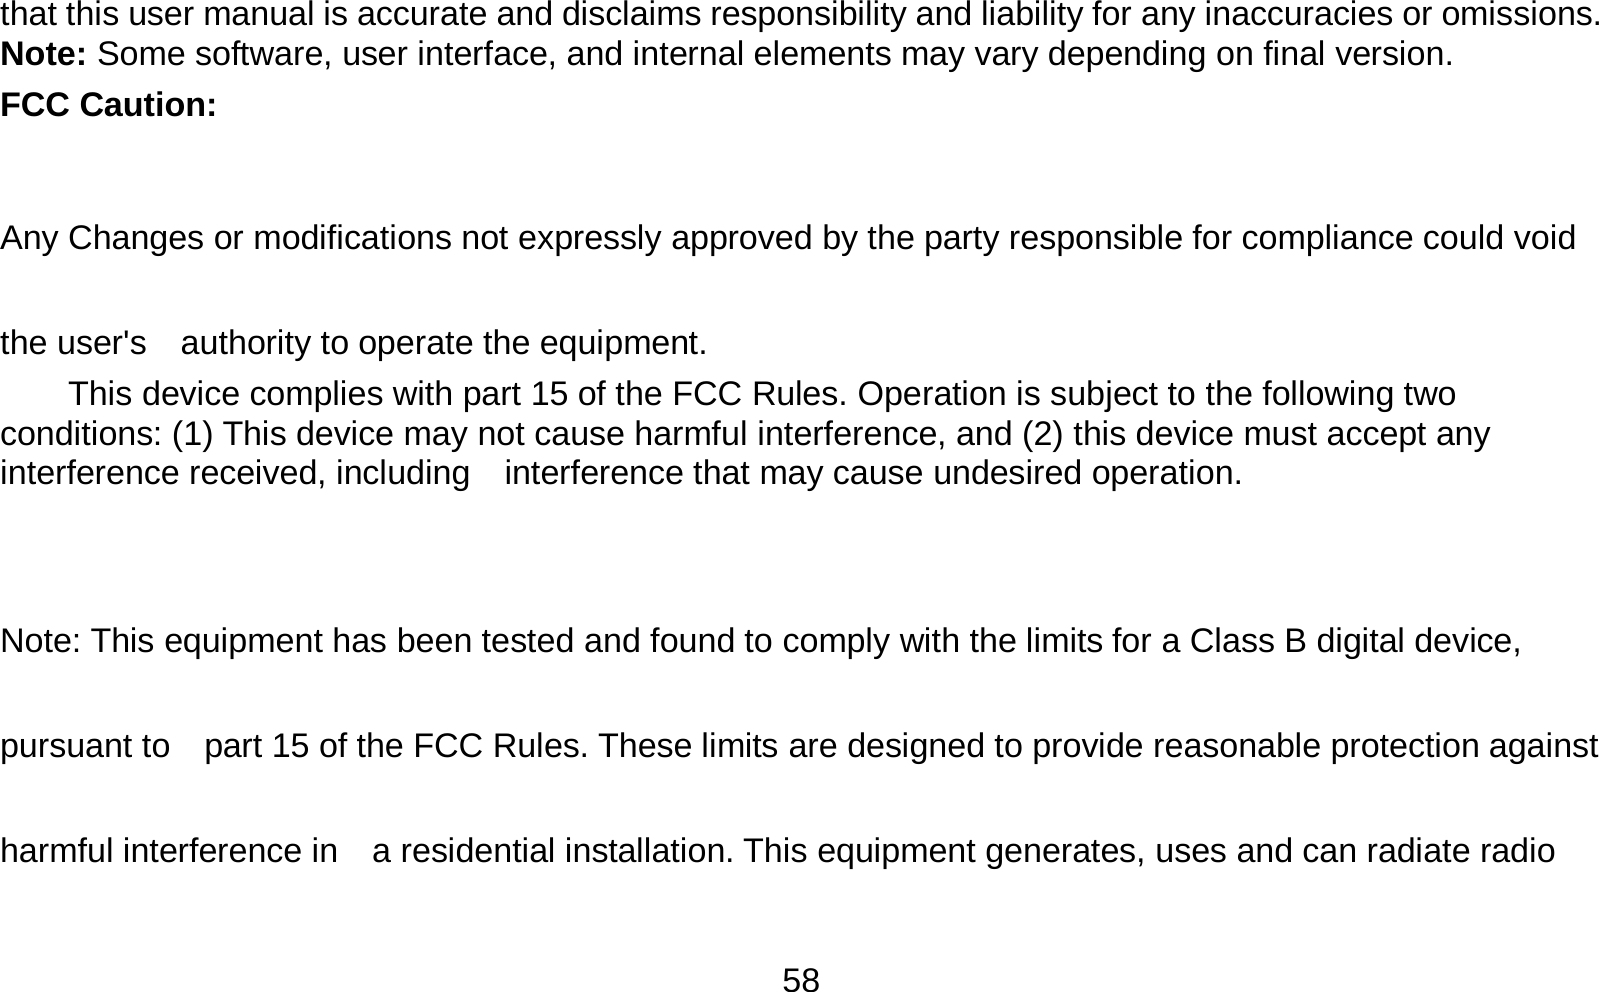   58that this user manual is accurate and disclaims responsibility and liability for any inaccuracies or omissions. Note: Some software, user interface, and internal elements may vary depending on final version.   FCC Caution:  Any Changes or modifications not expressly approved by the party responsible for compliance could void the user&apos;s    authority to operate the equipment.     This device complies with part 15 of the FCC Rules. Operation is subject to the following two conditions: (1) This device may not cause harmful interference, and (2) this device must accept any interference received, including    interference that may cause undesired operation.  Note: This equipment has been tested and found to comply with the limits for a Class B digital device, pursuant to    part 15 of the FCC Rules. These limits are designed to provide reasonable protection against harmful interference in    a residential installation. This equipment generates, uses and can radiate radio 